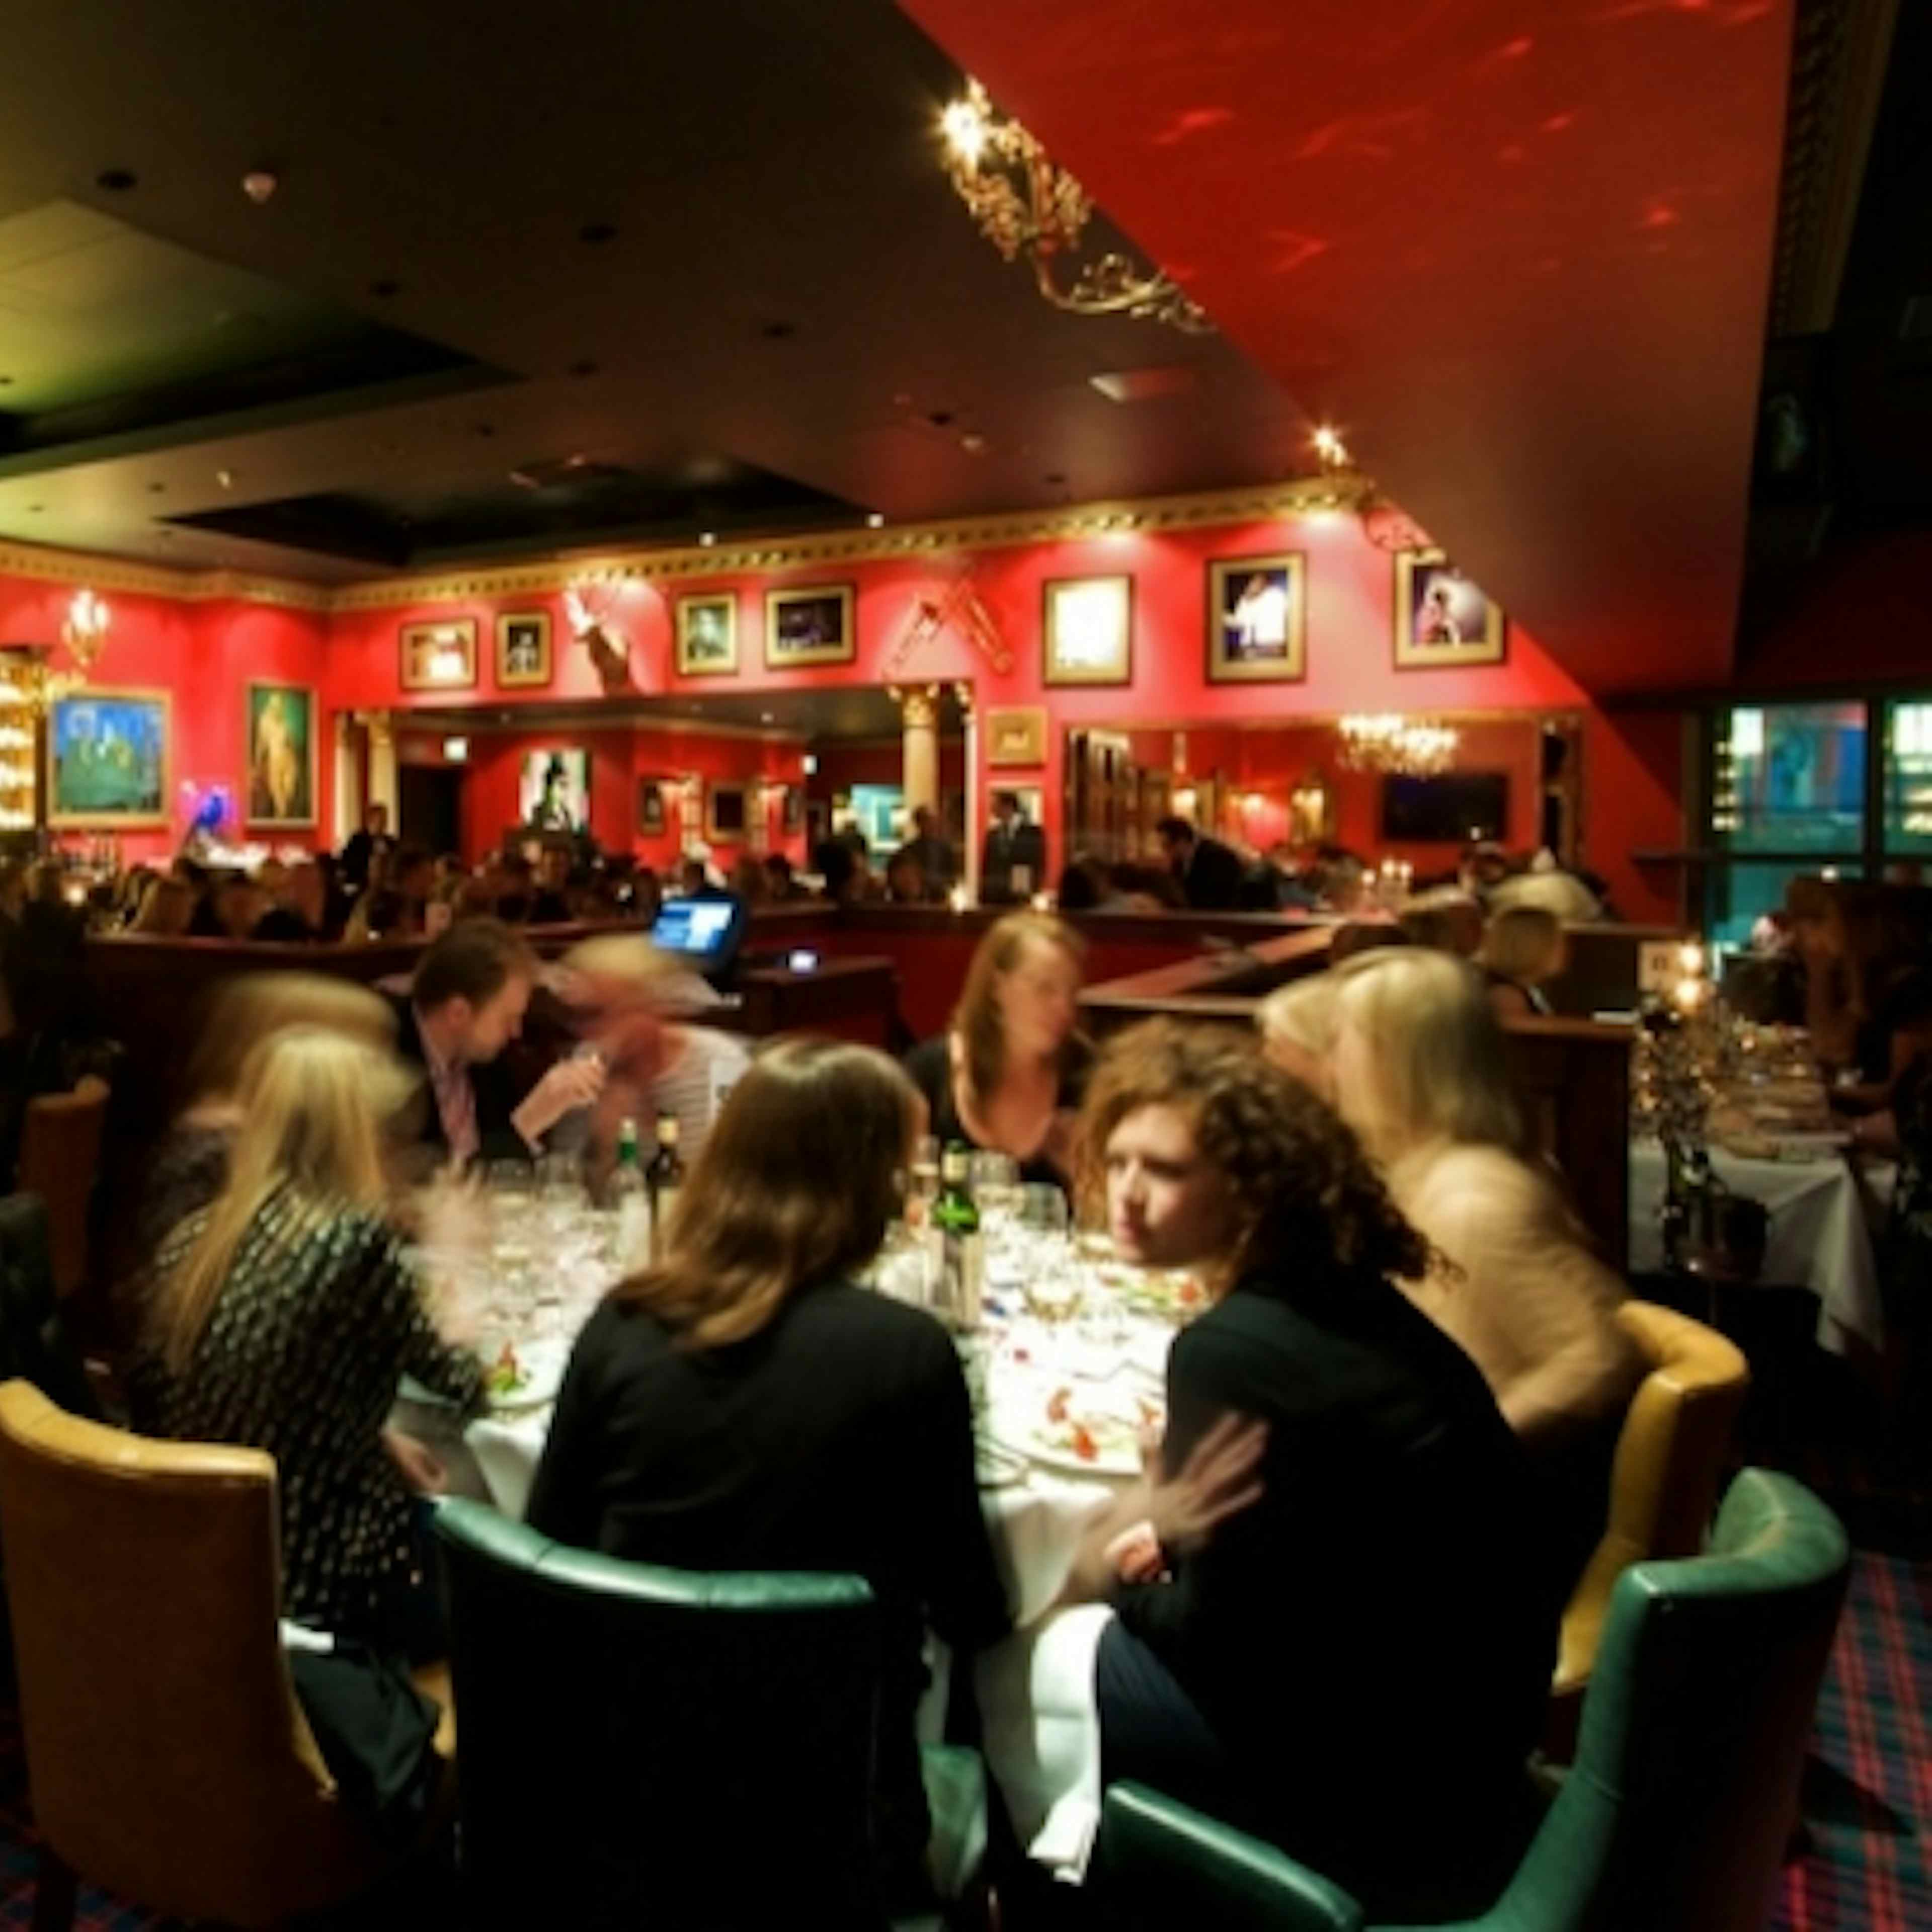 Boisdale of Canary Wharf - Second Floor Restaurant image 2